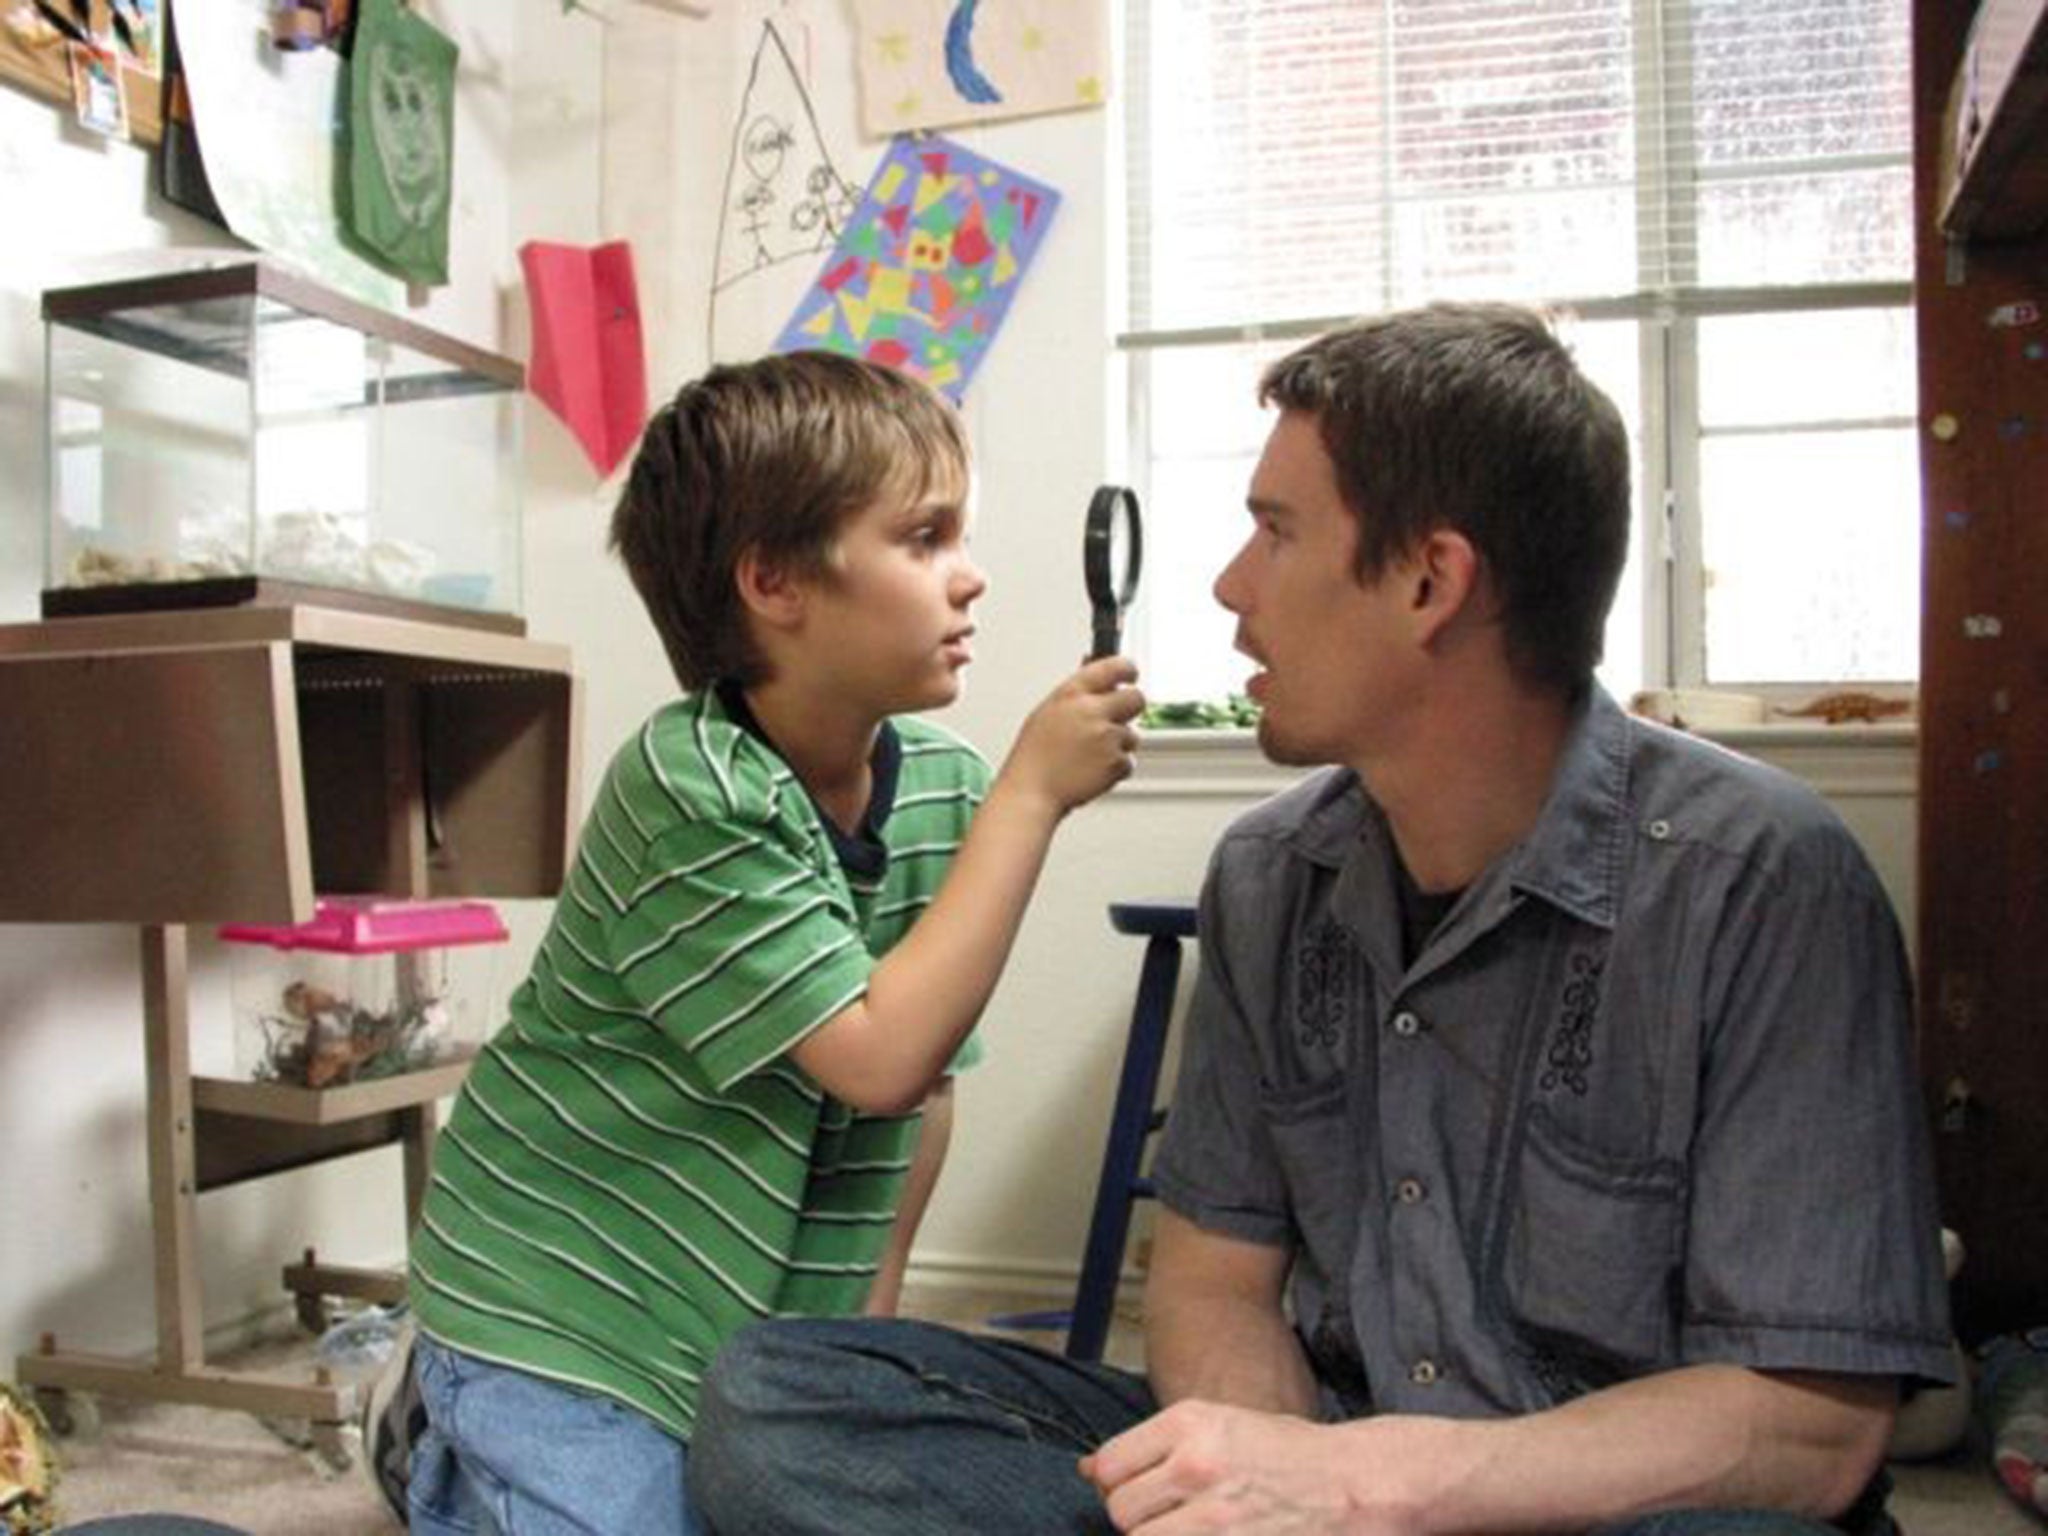 Ellar Coltrane and Ethan Hawke in Richard Linklater’s ‘Boyhood’. Shot over 12 years, the film features untrained and trained actors